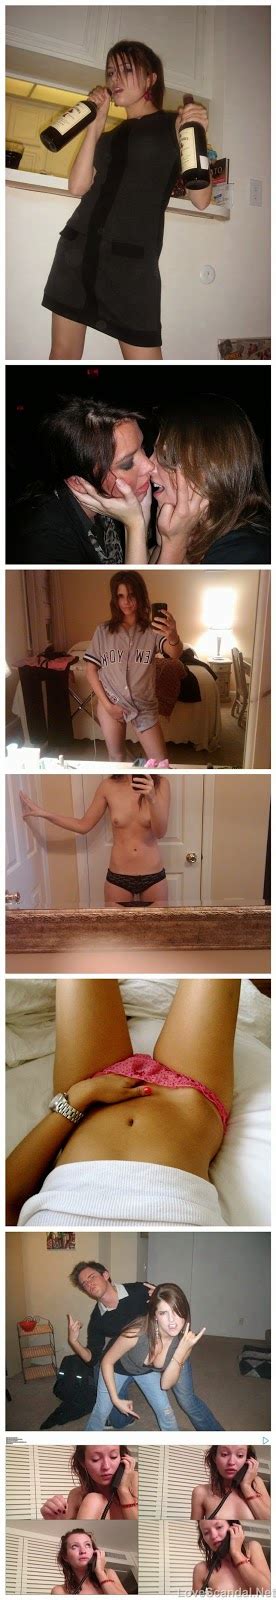 more than 100 celebrities hacked nude photos leaked download [part 3] amateur